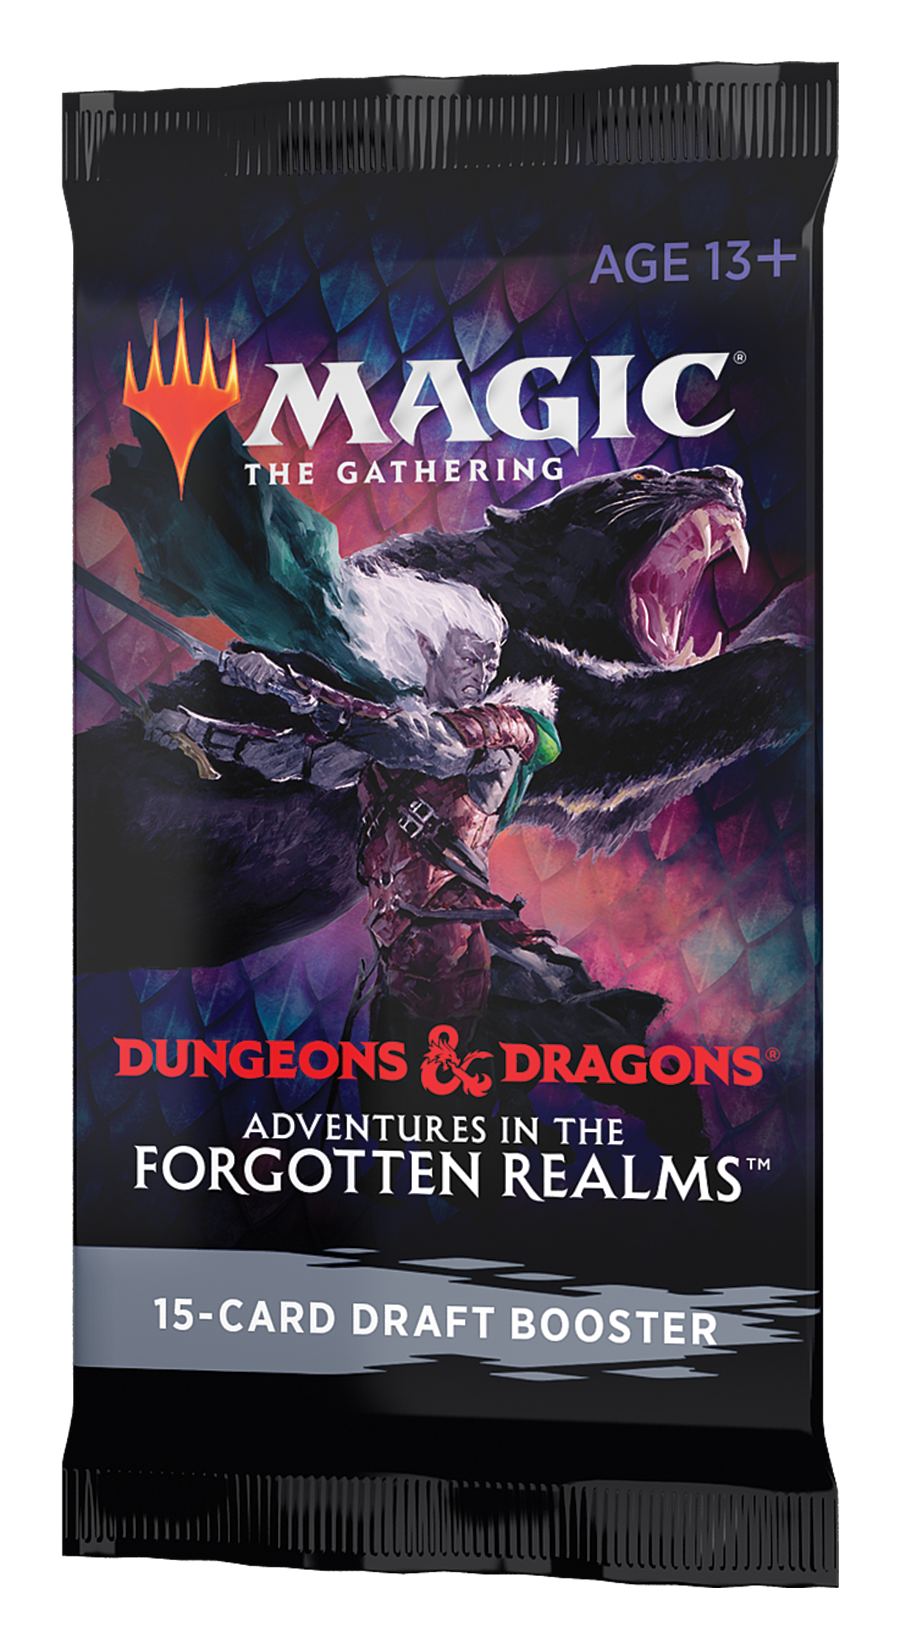 Boite de Booster Draft Dungeons & Dragons : Forgotten Realms - Adventures in the Forgotten Realms